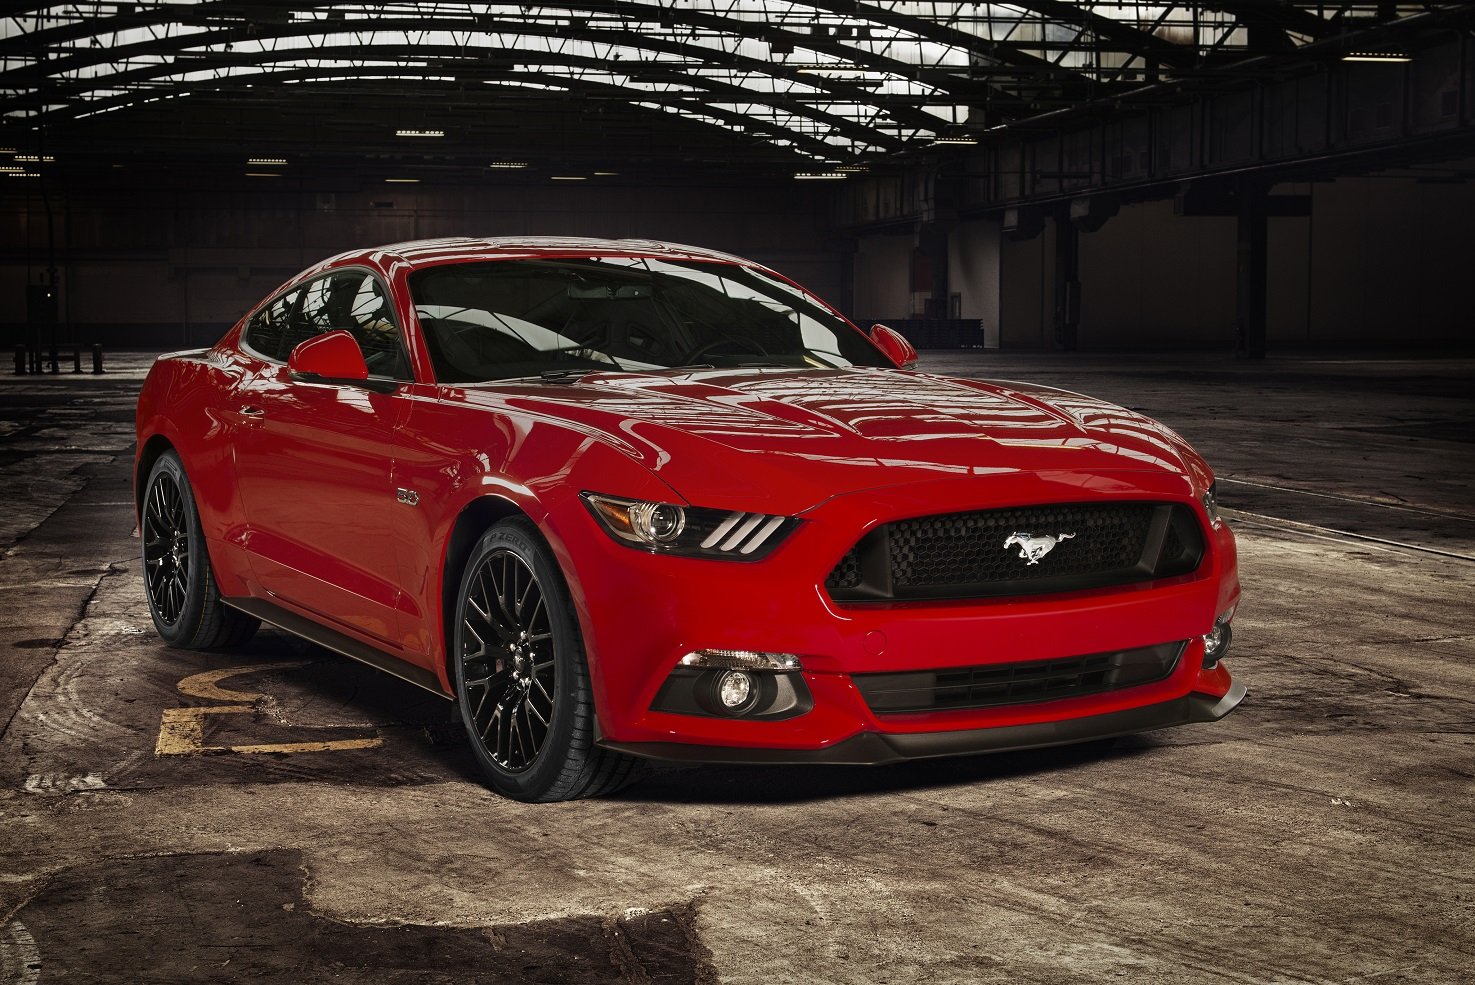 ford, Mustang gt, Eu spec, 2015, Coupe, Cars Wallpaper